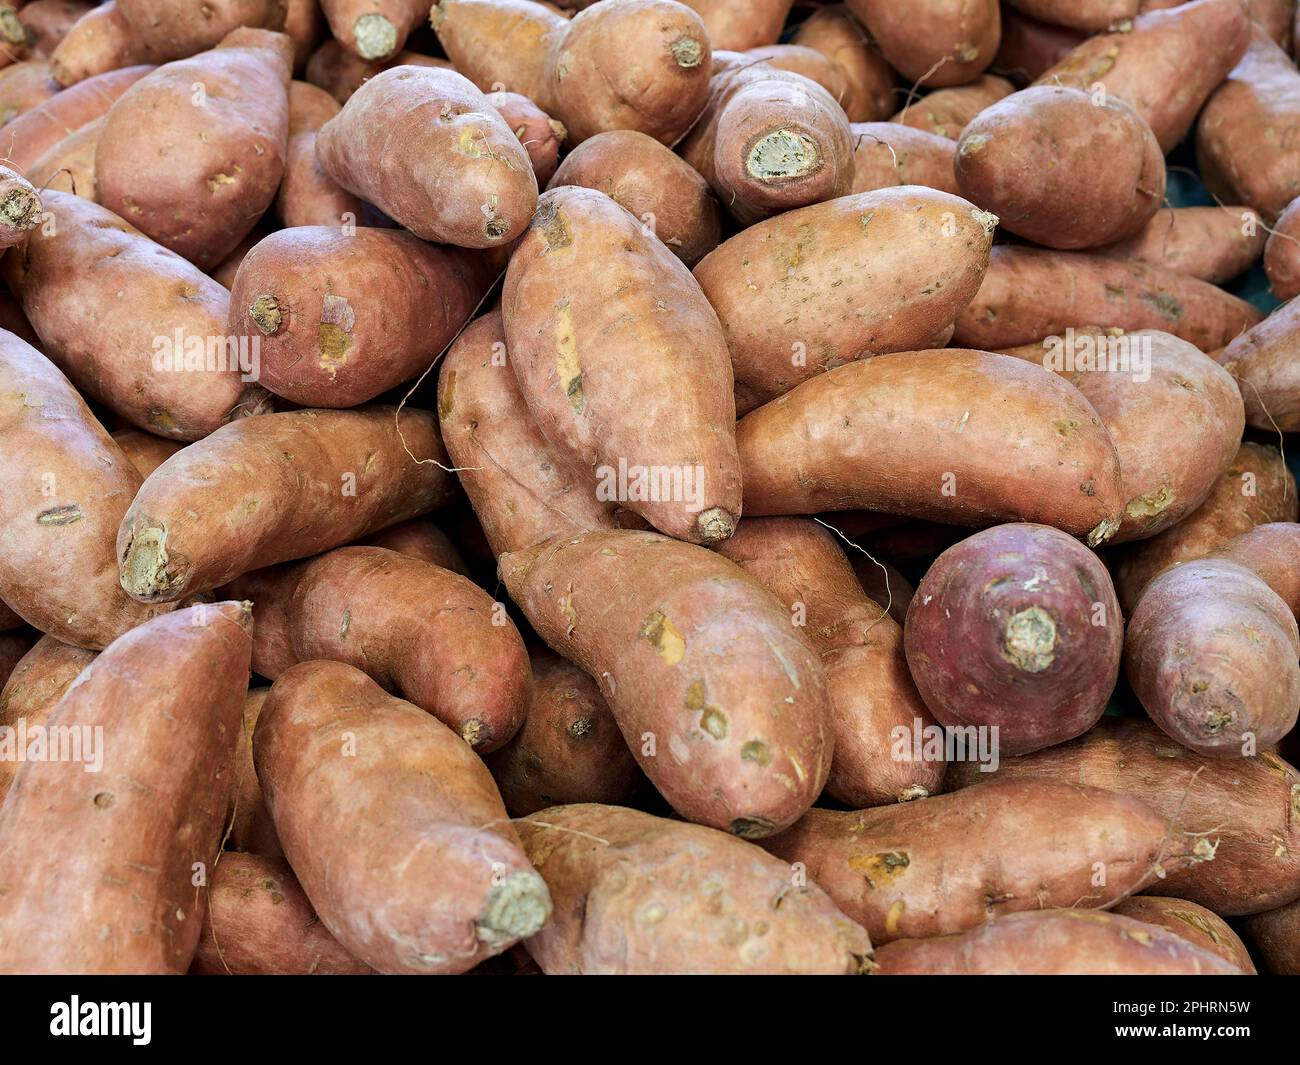 Fresh Mississippi reds sweet potatoes for sale at a farm market in Montgomery Alabama, USA. Stock Photo